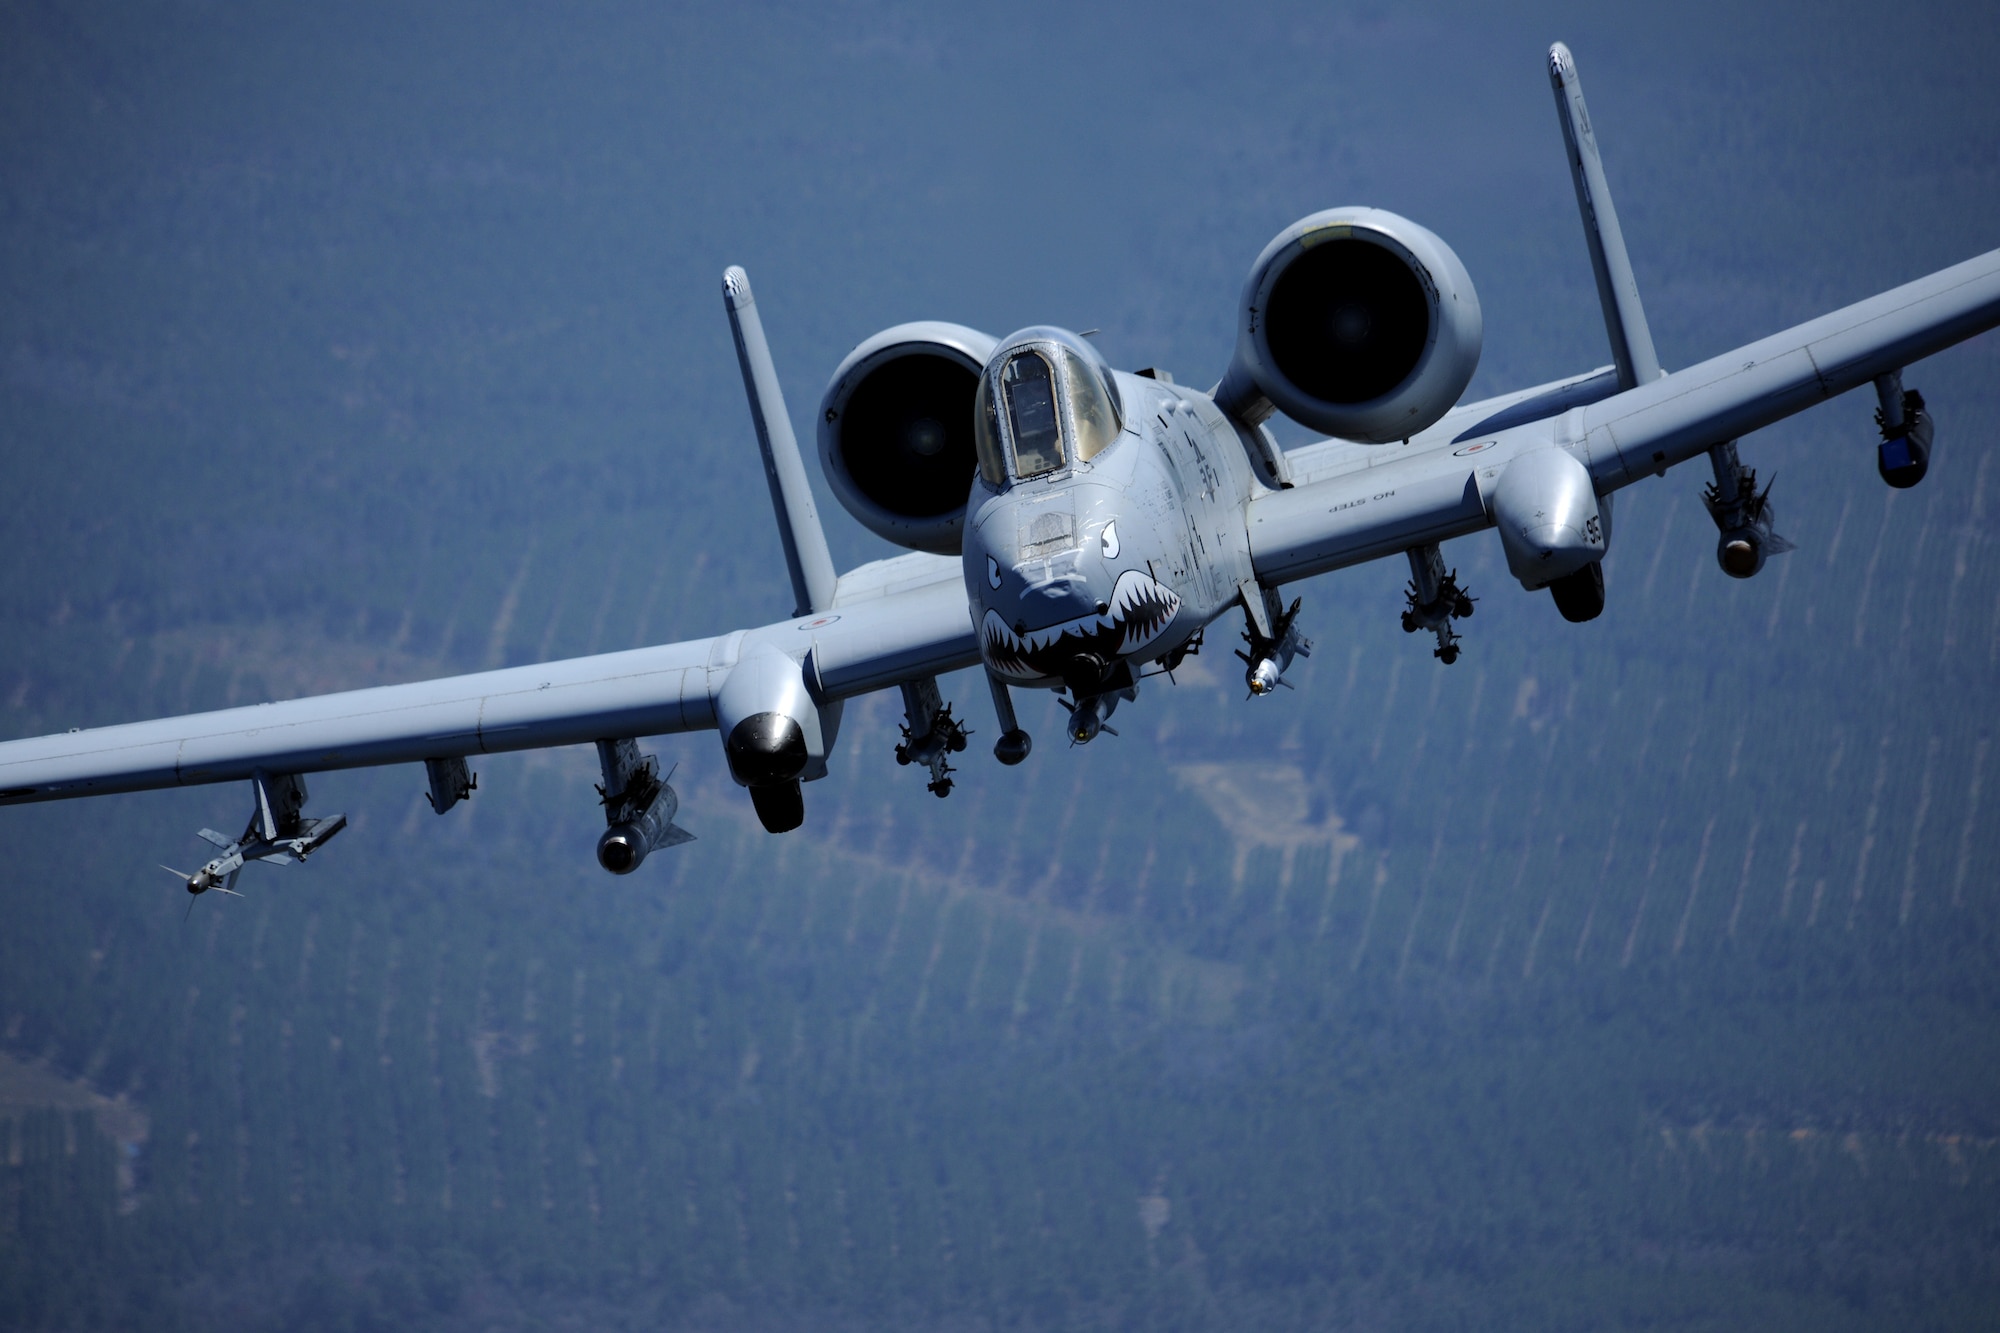 MOODY AIR FORCE BASE, Ga. -- An A-10C Thunderbolt II shows its munitions capability while in-flight during a training exercise here March 16. The moving target at Grand Bay Bombing and Gunnery Range is stationed on a 1,000-foot track and is remotely-controlled. (U.S. Air Force photo/Airman 1st Class Benjamin Wiseman)